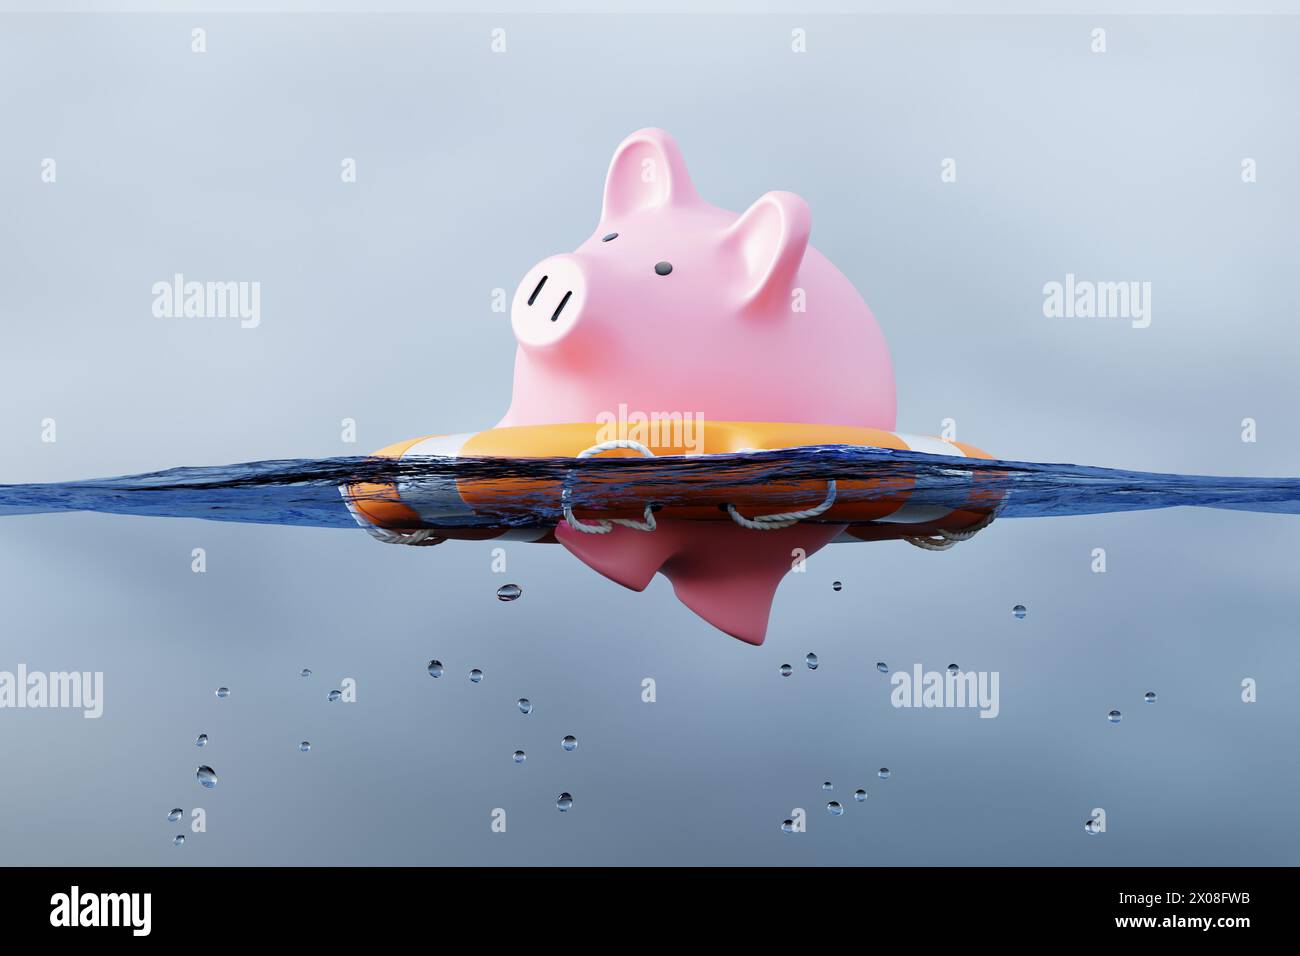 Pink piggy bank in a lifebelt floating on a clear water in blue sky. Illustration of the concept of financial crisis, recession and banking panics Stock Photo